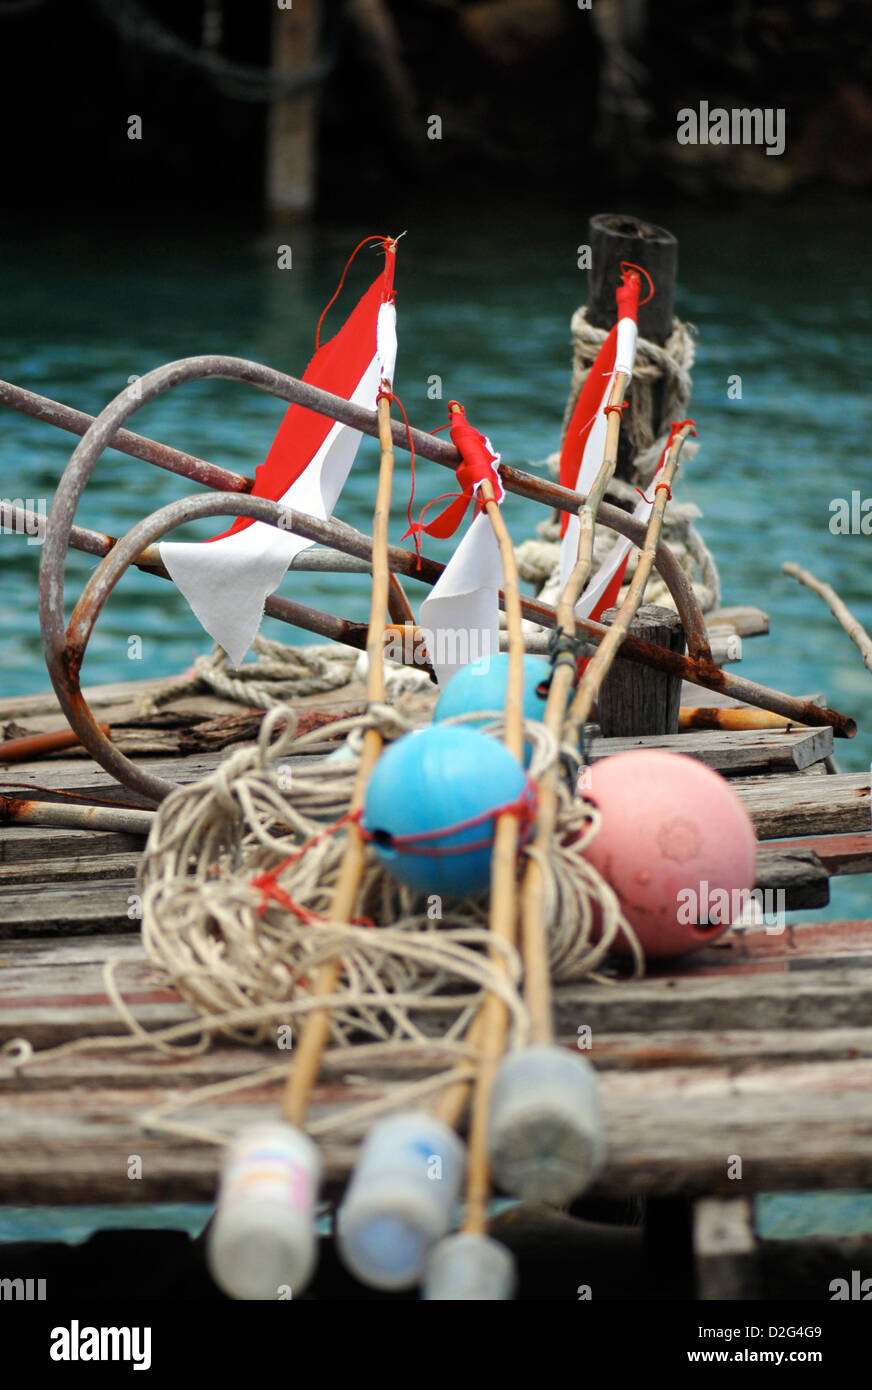 fishing floats and net markers lie in the sun on a rickety old wooden jetty Stock Photo